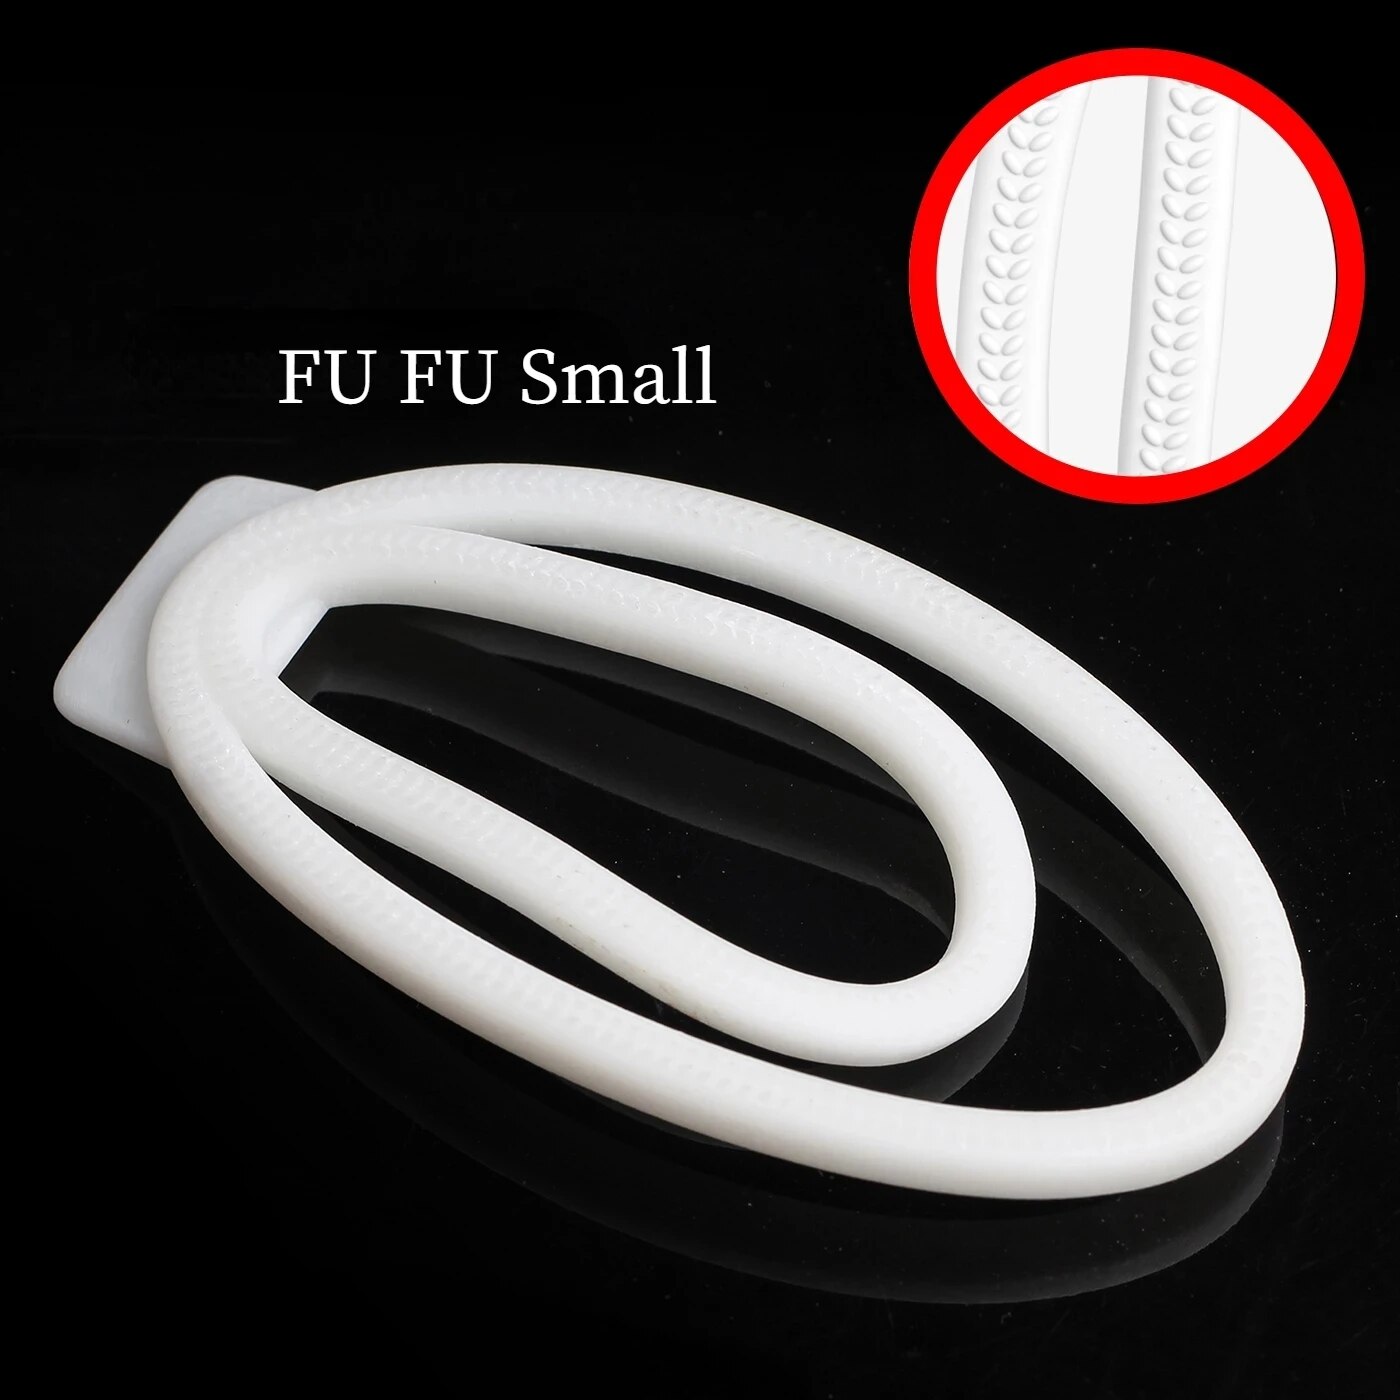 Fufu Clip Male Panty Chastity Device Male Mimic Female Pussy